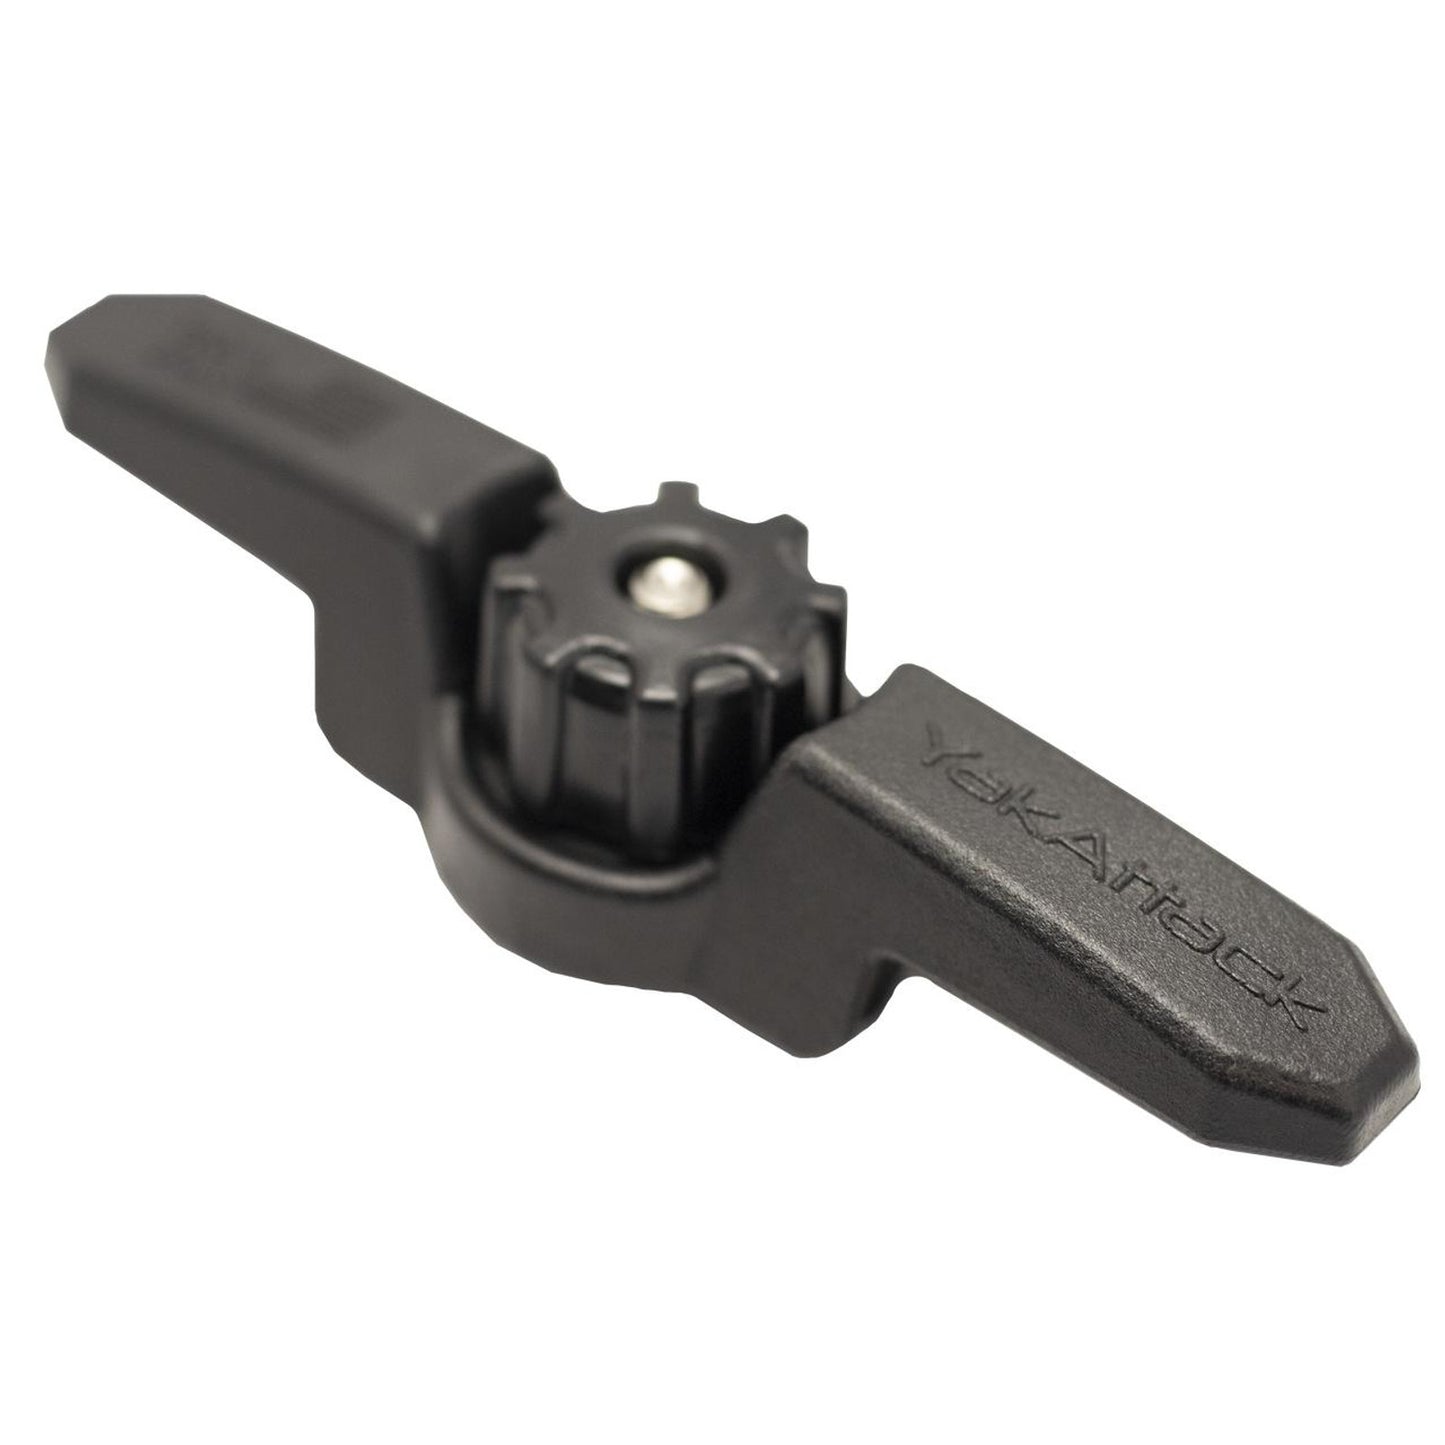 YakAttack GT Cleat XL, Kayak Track Mount Line Cleat